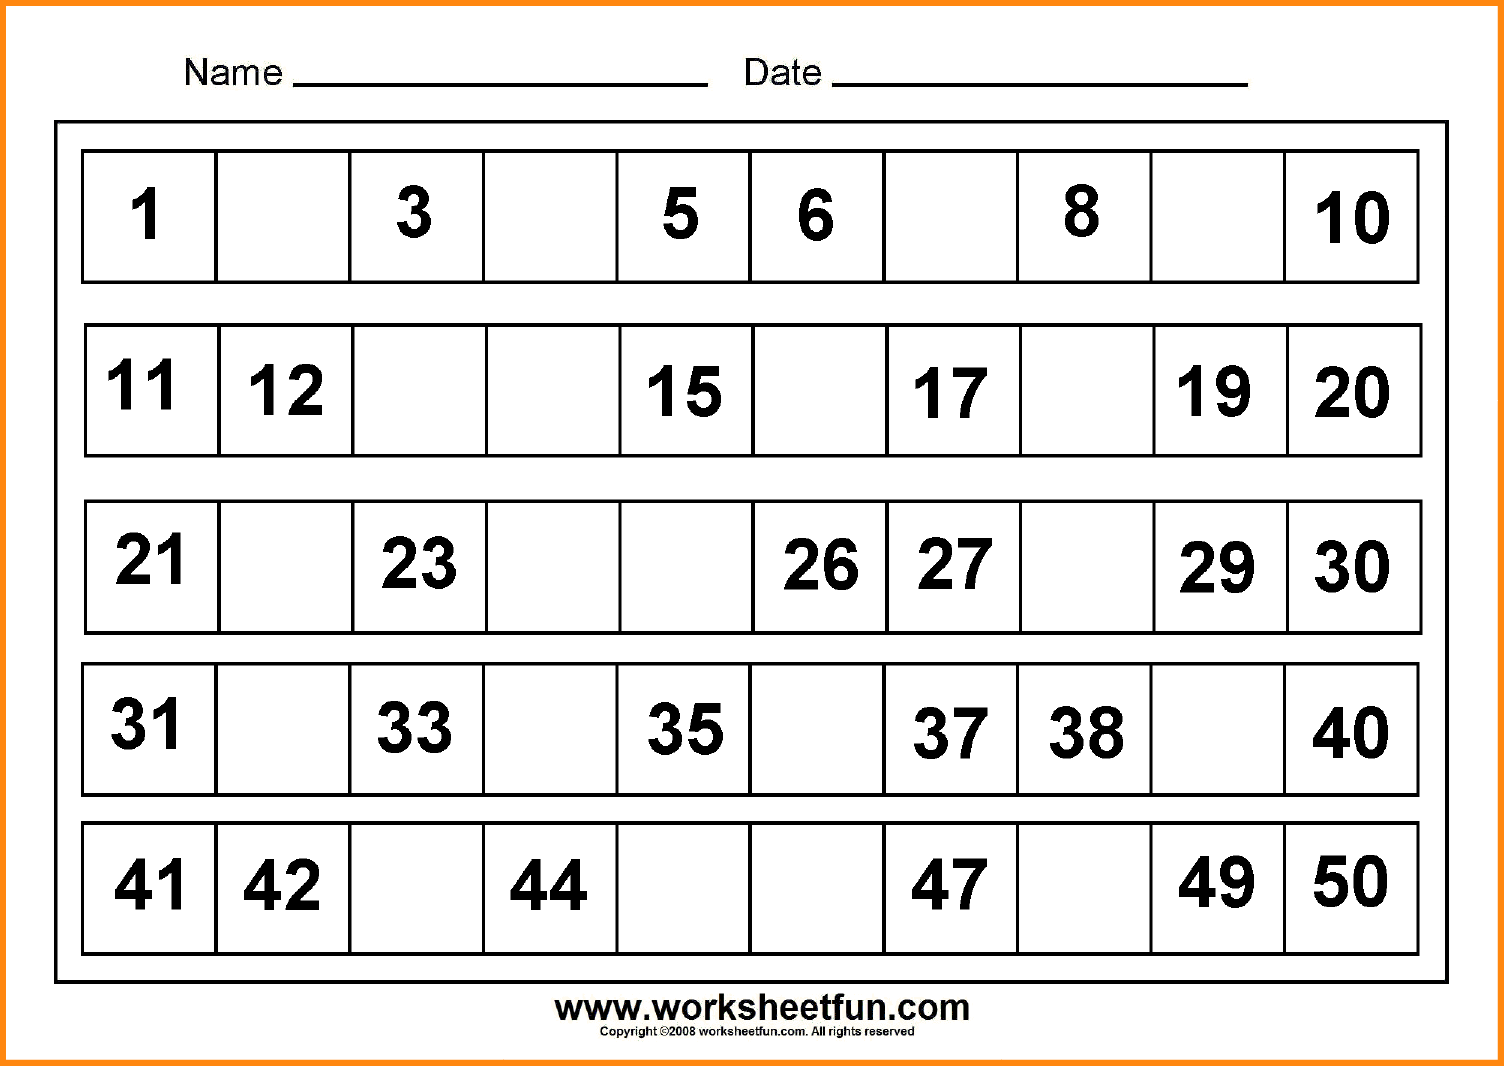 Fill In The Missing Numbers Worksheets For All